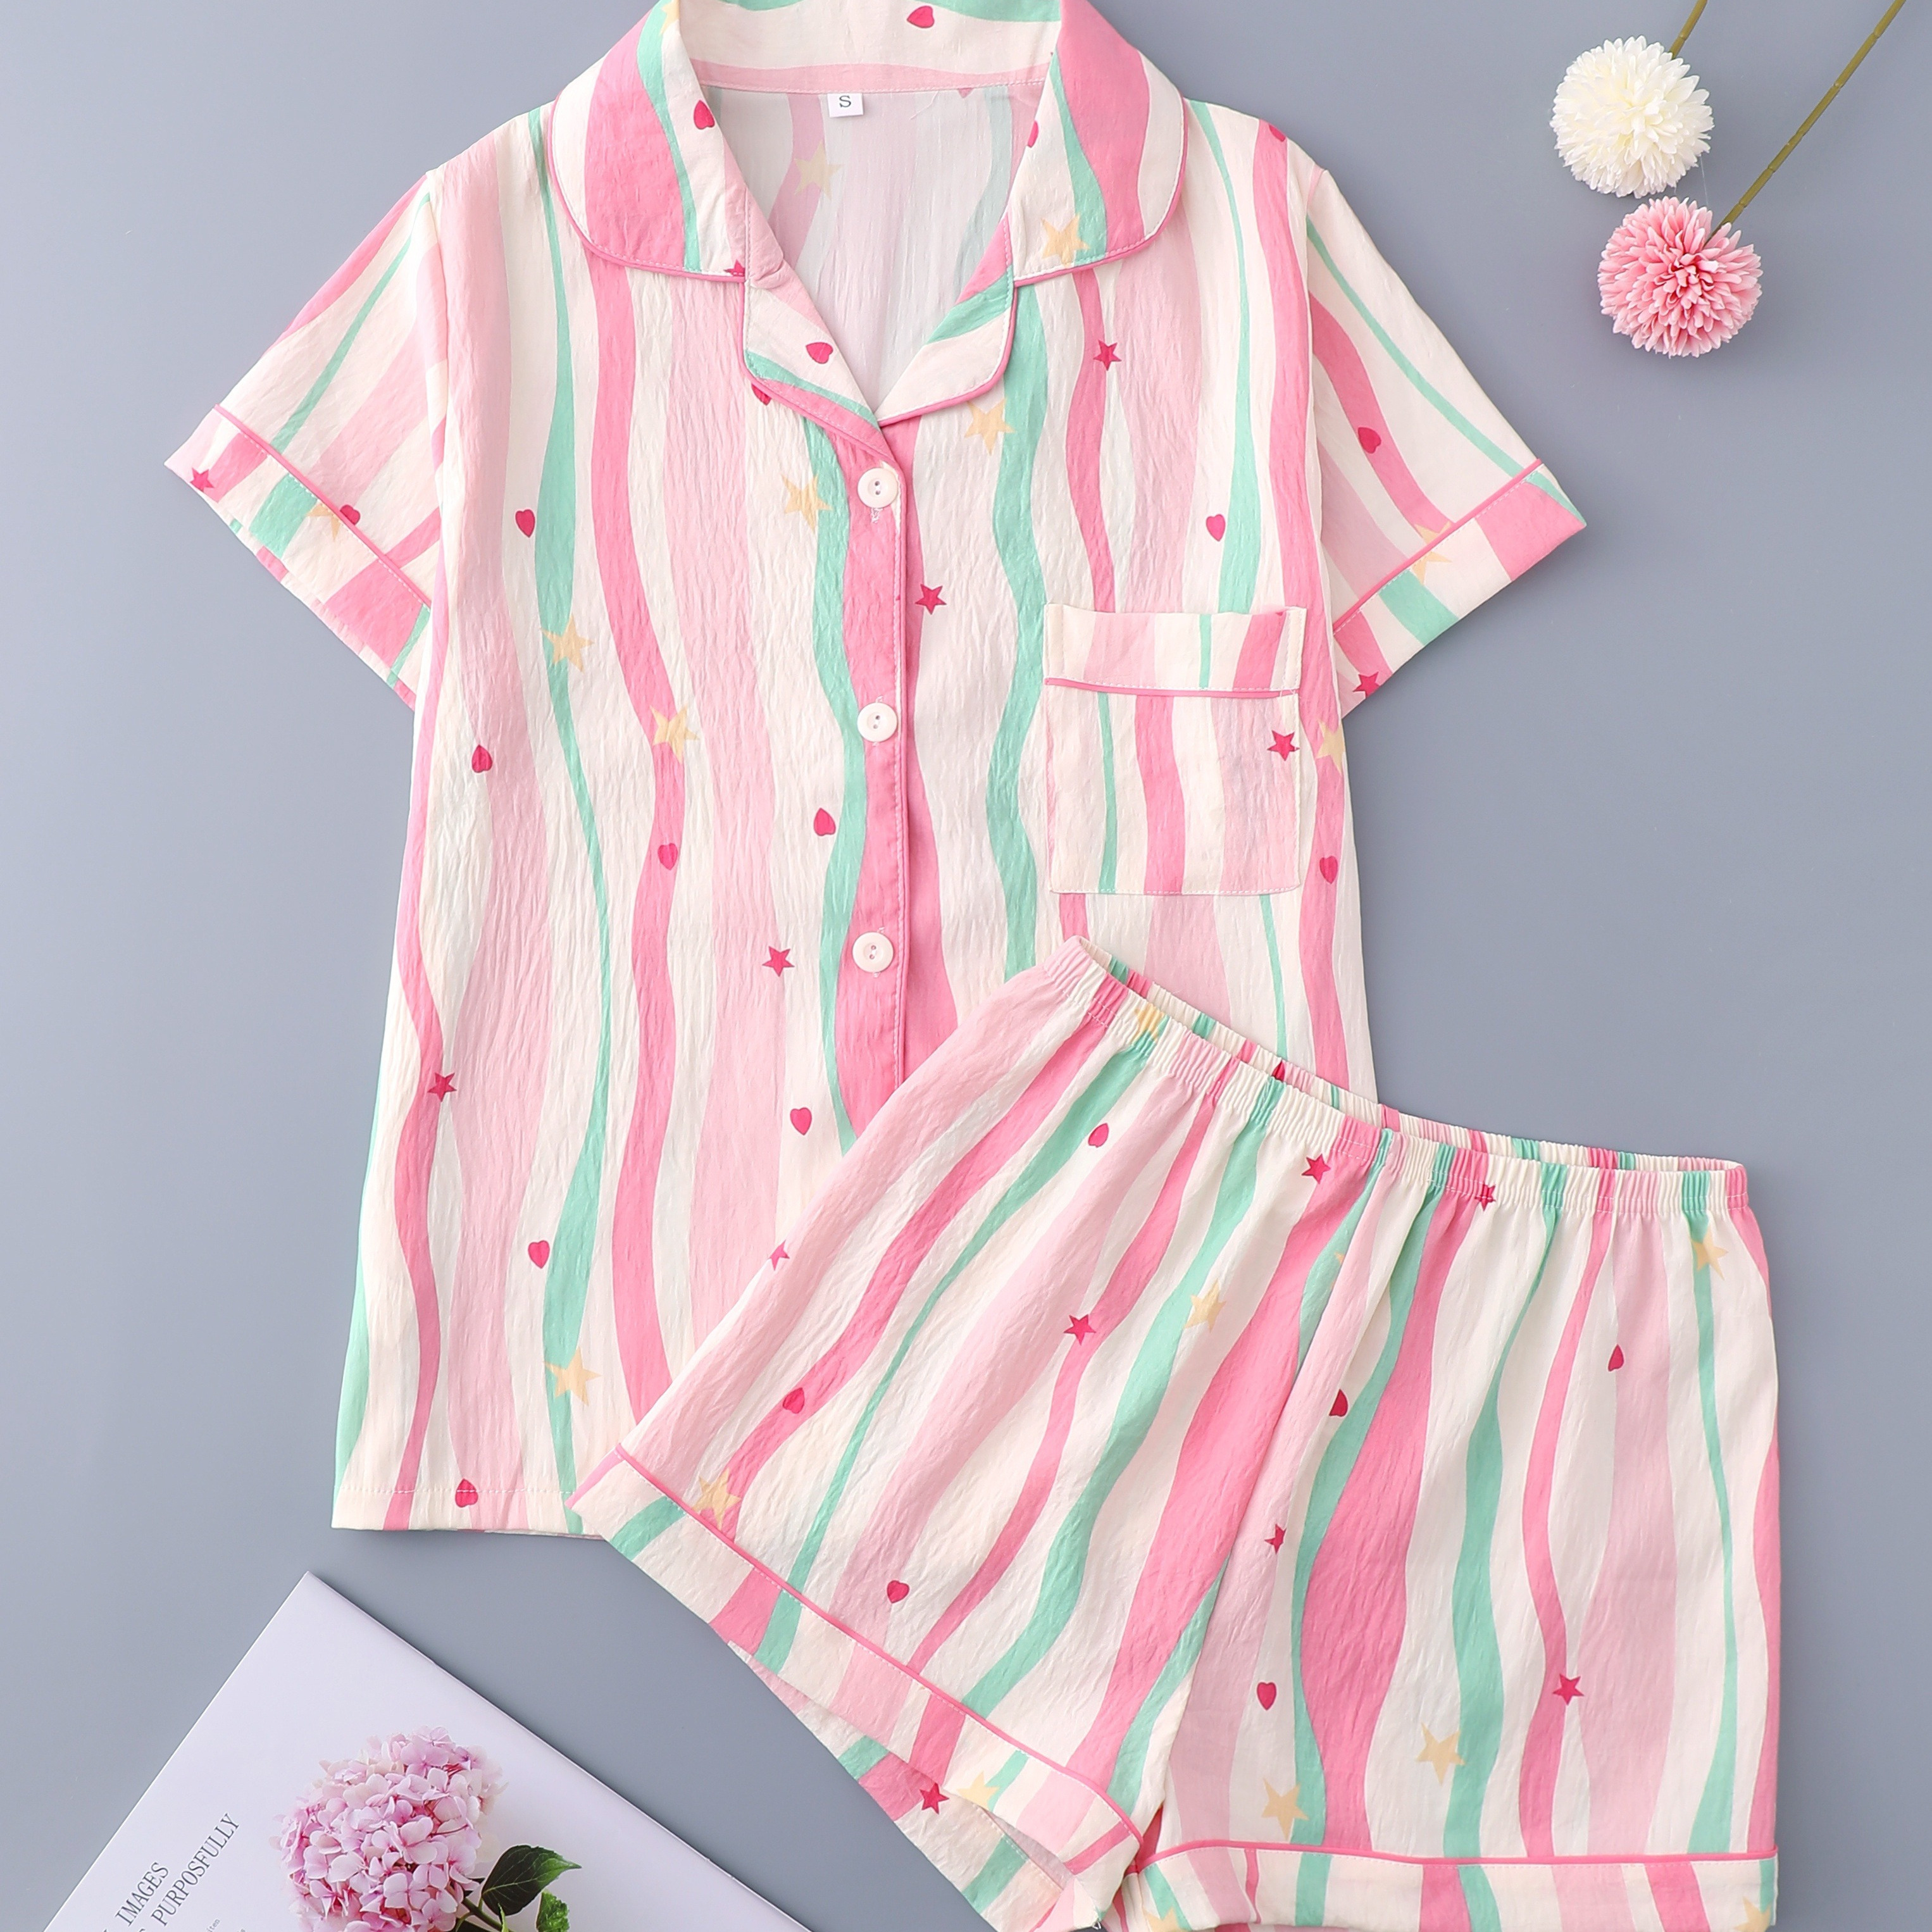 

Women's Contrast Colorblock Print Sweet Pajama Set, Short Sleeve Buttons Lapel Top & Shorts, Comfortable Relaxed Fit